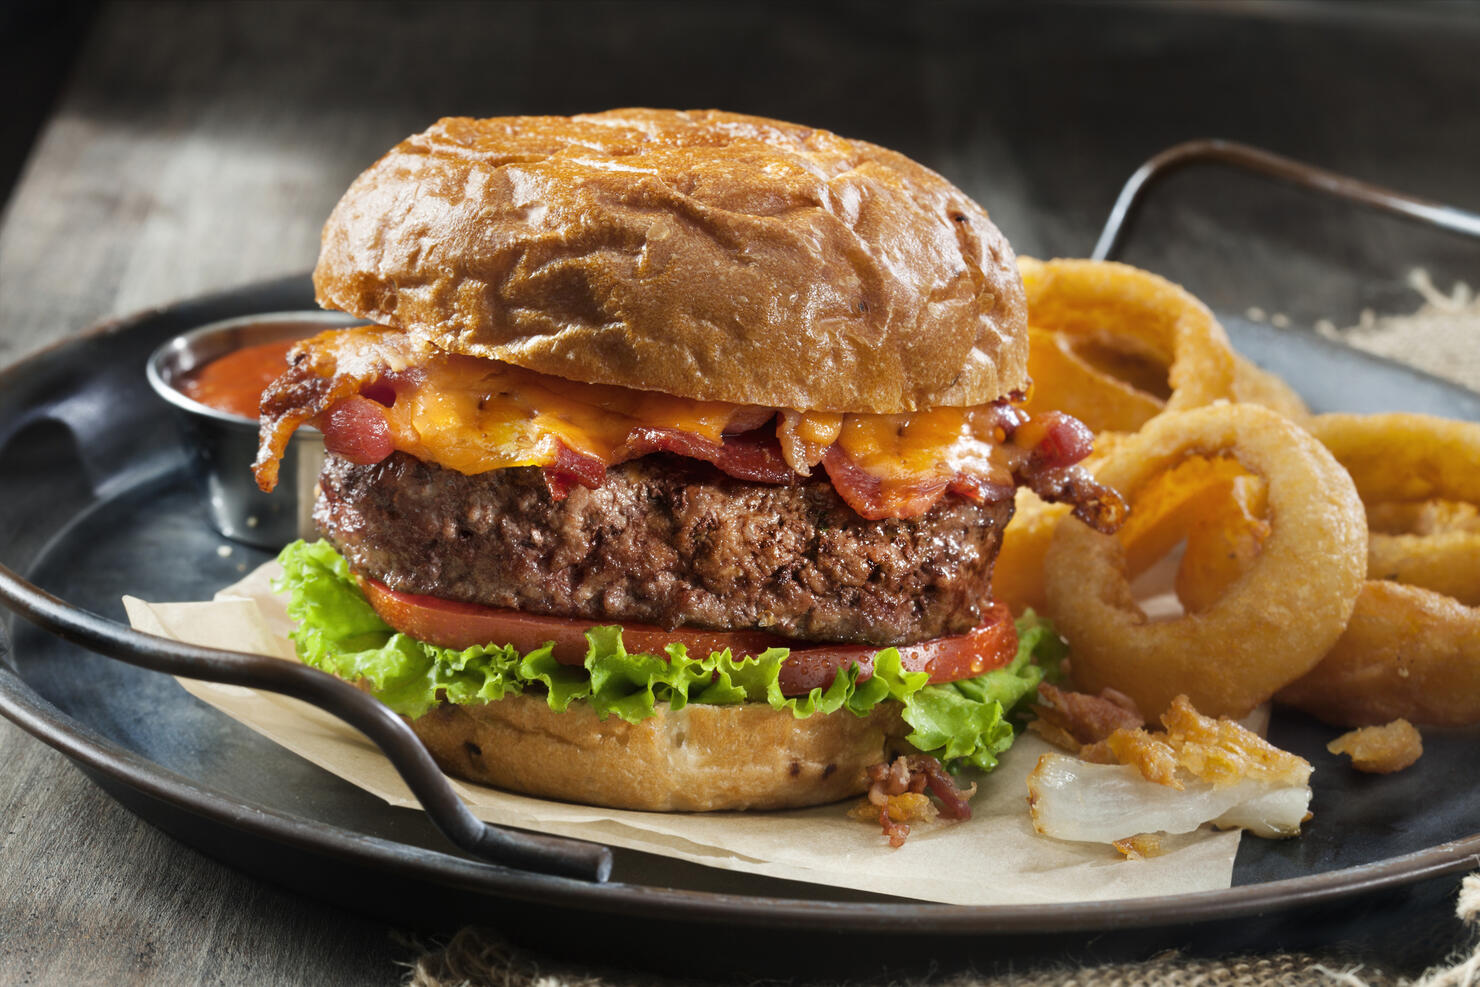 Bacon and Cheddar Burger with Lettuce, Tomato and Thick Cut Onion Rings on a Toasted Onion Bun